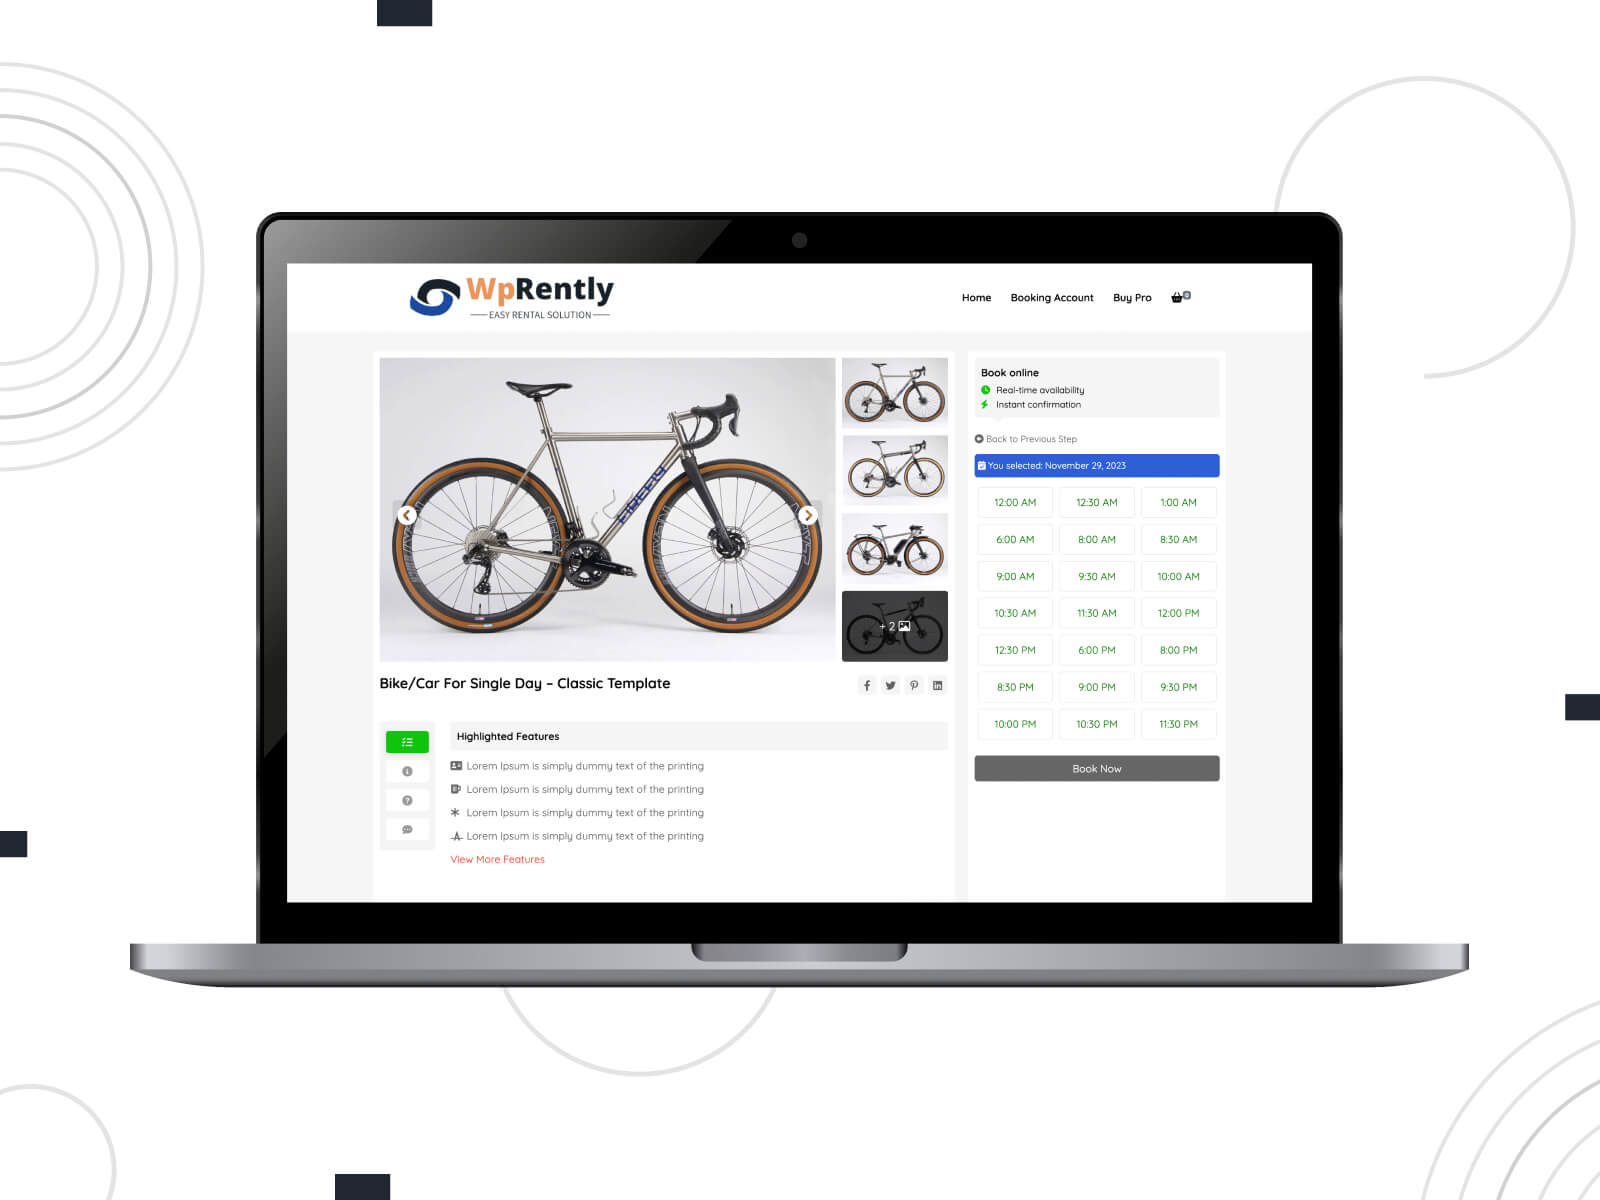 WPRently - one of the best WordPress calendar plugins for bikes, cars, and inventory rentals.